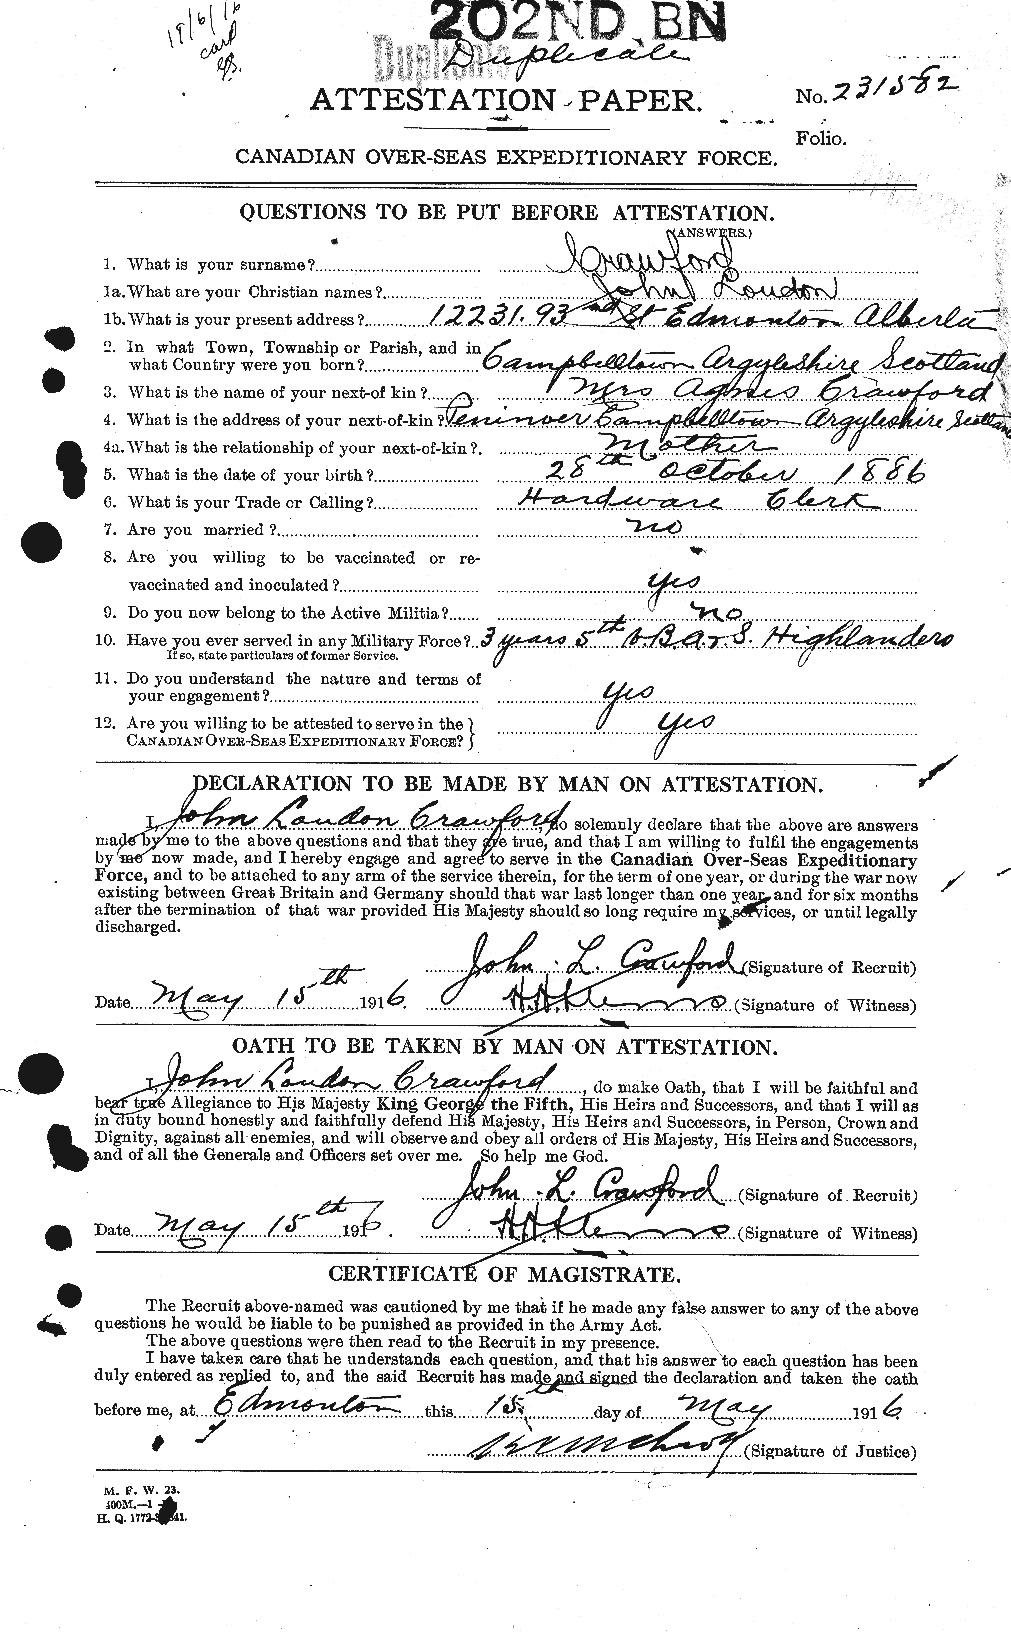 Personnel Records of the First World War - CEF 061828a